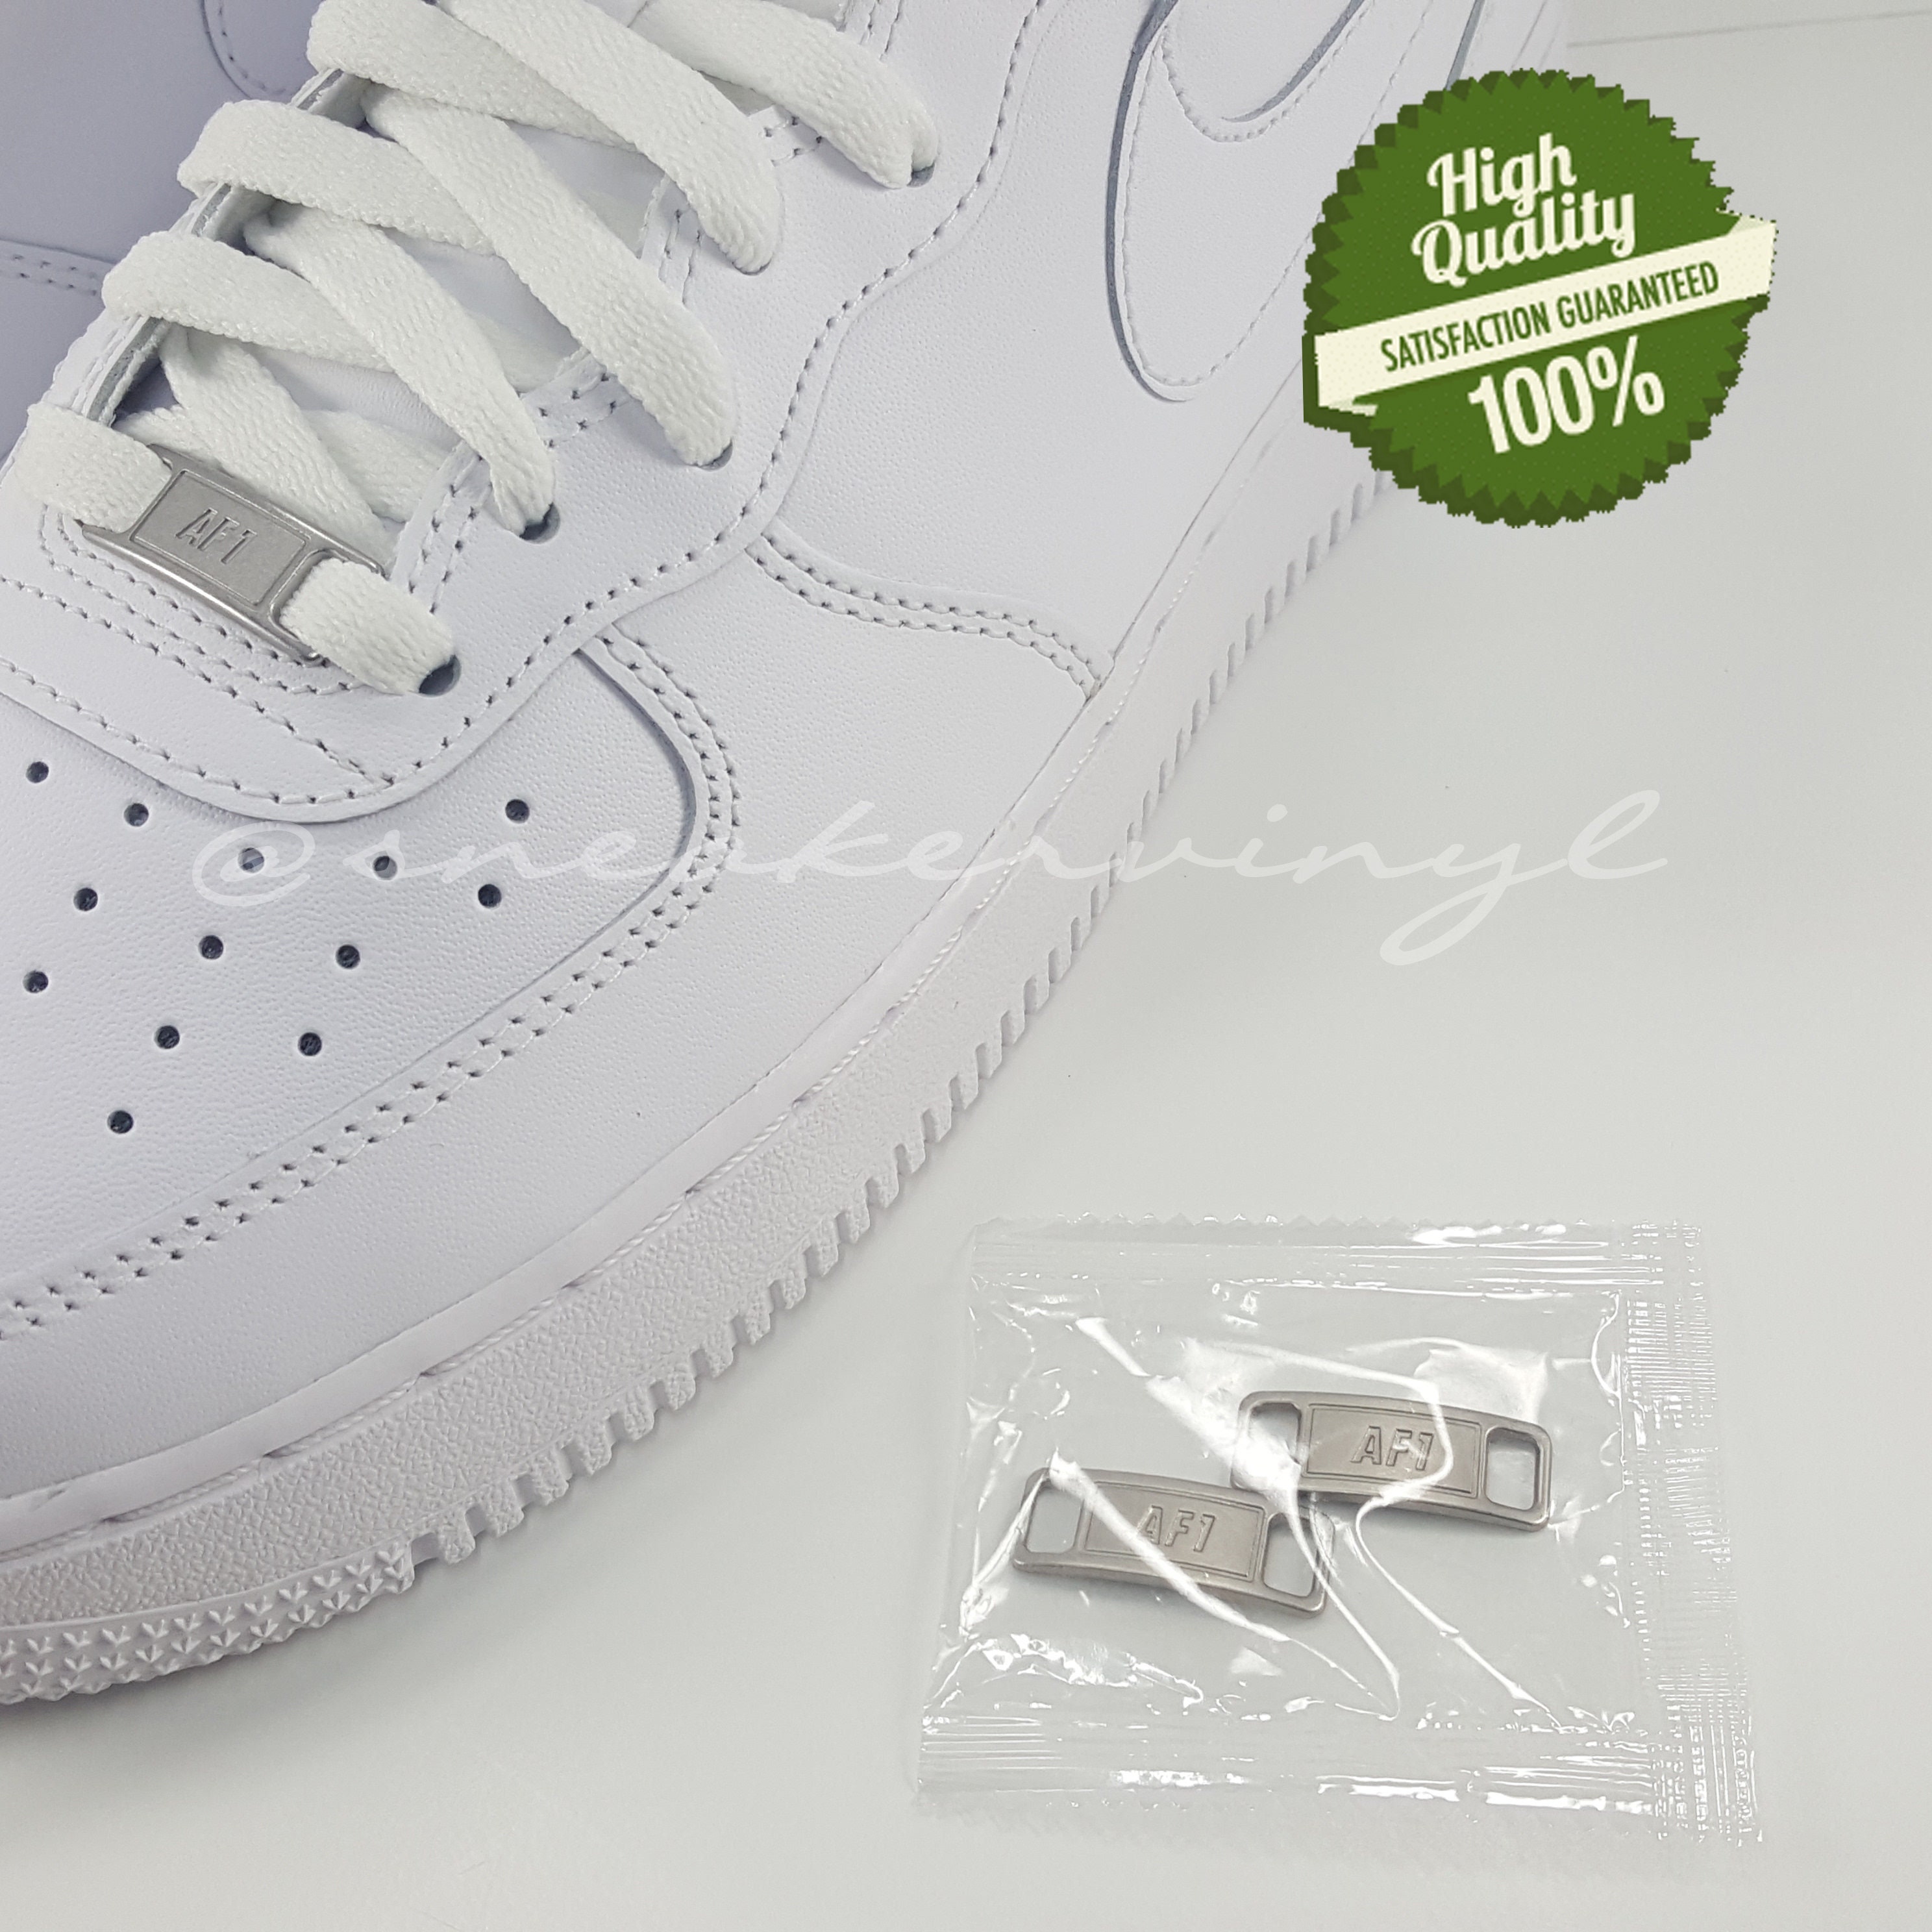 extase Turbine vacuüm Nike Air Force 1 Lace Tag Replacement - Etsy